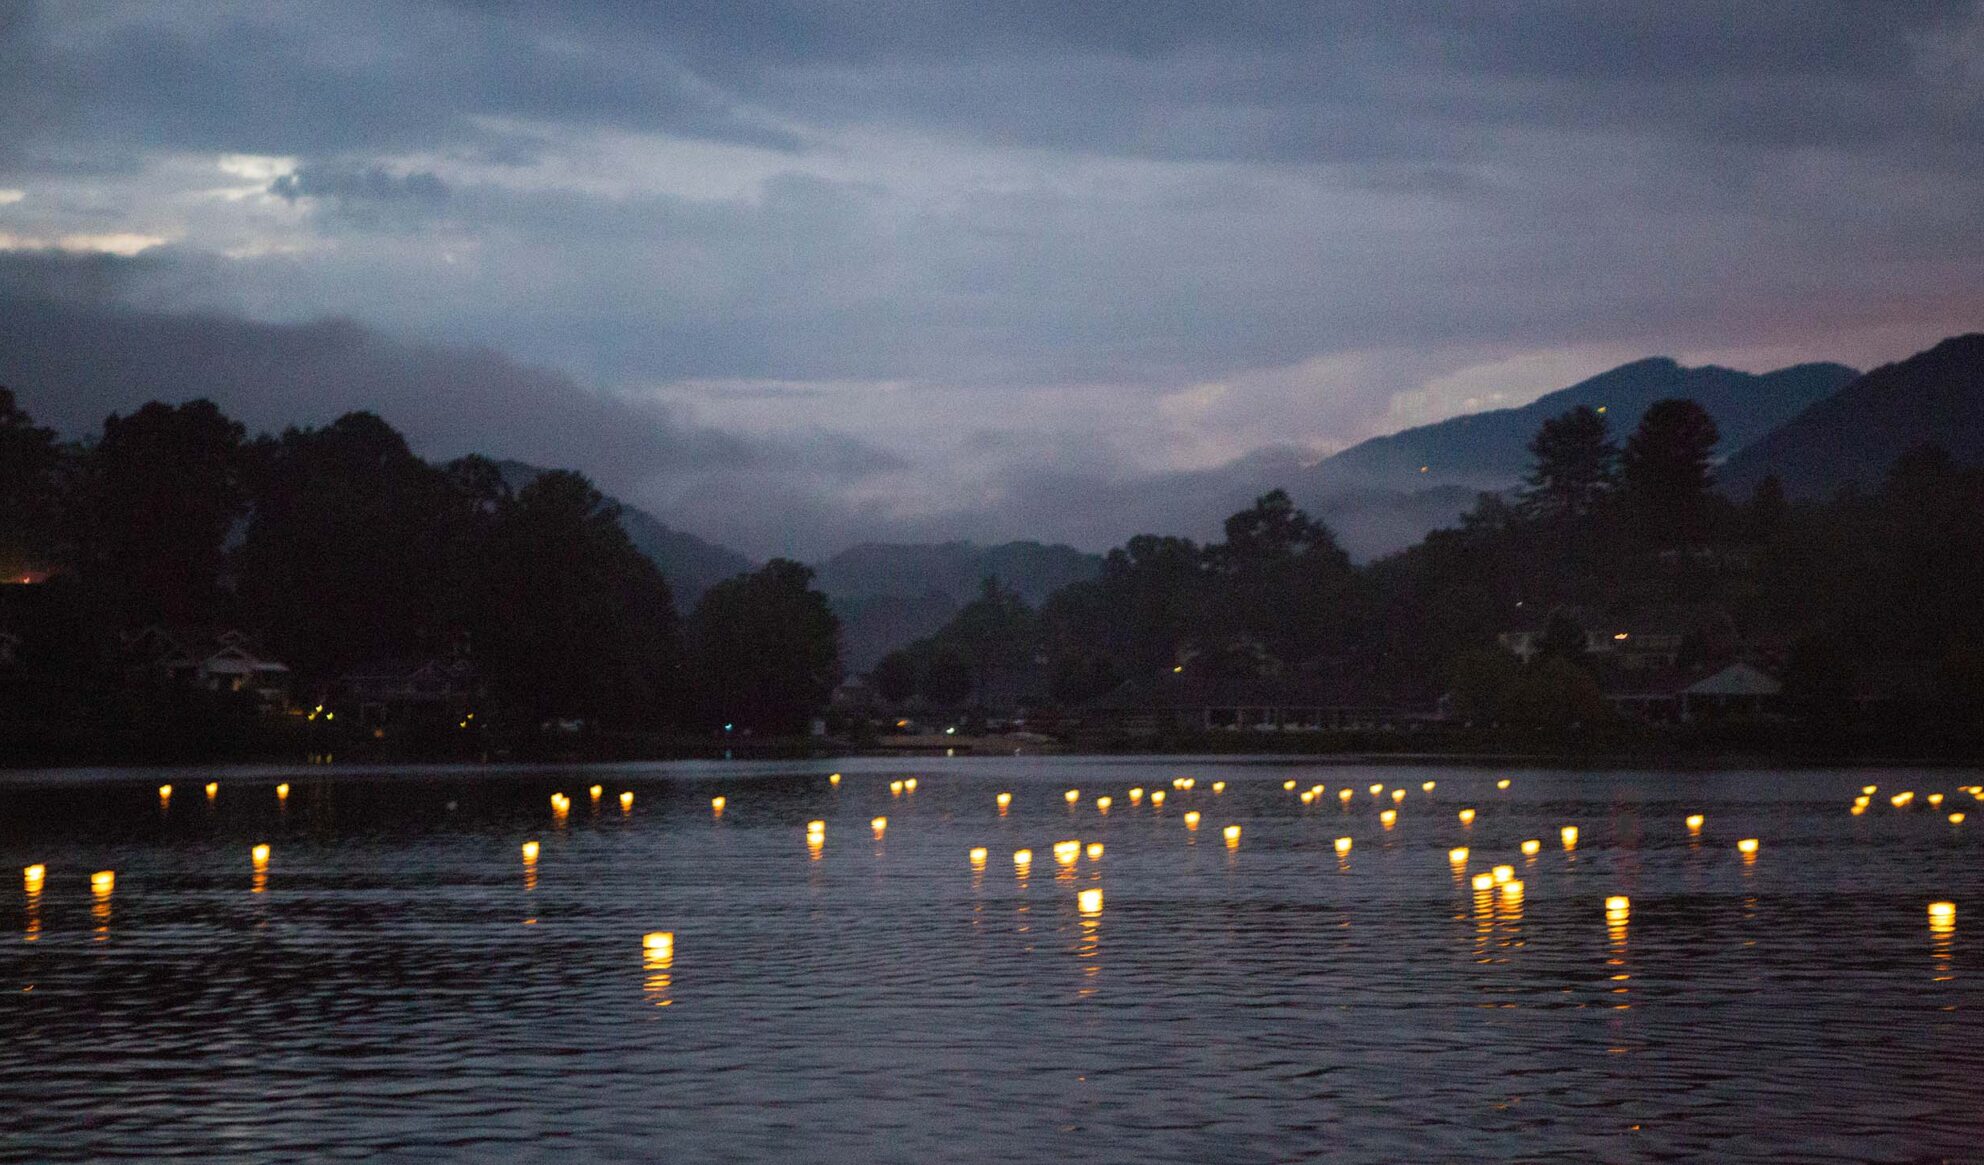 Floating wish lanterns cast glimmers of light on the water